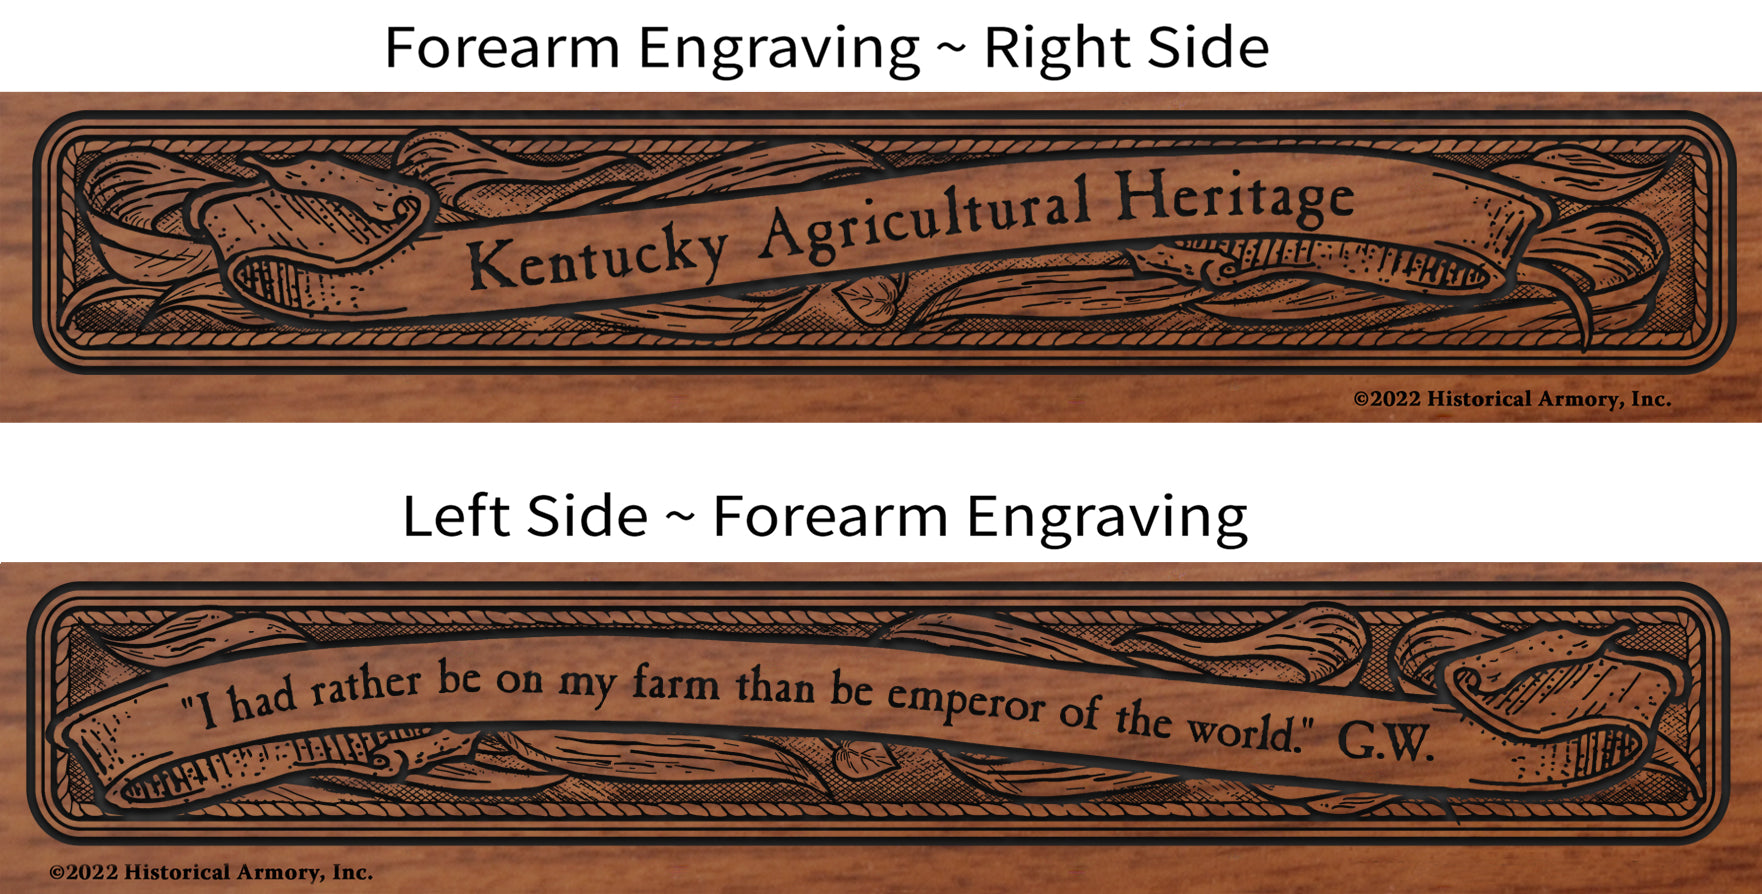 Kentucky State Agricultural Heritage Engraved Rifle